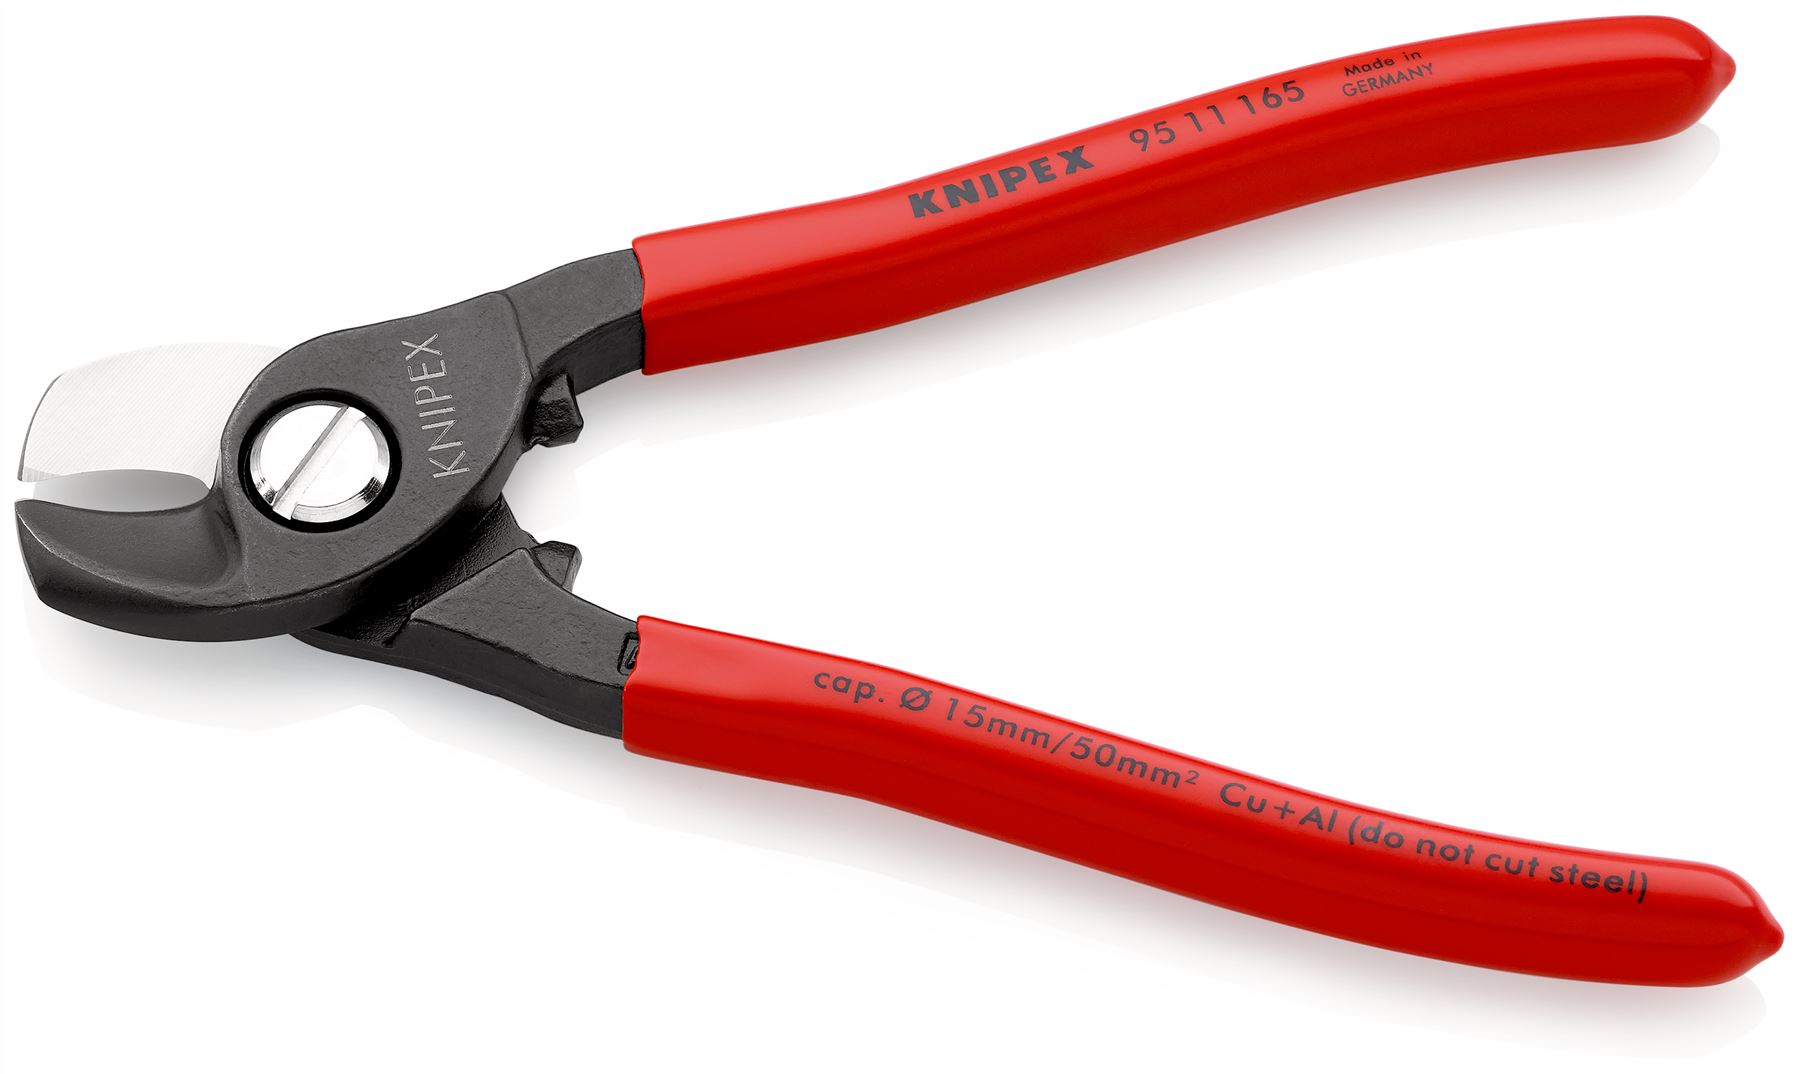 KNIPEX Cable Shears Cutting Pliers Cuts Cable up to 15mm Diameter 165mm Plastic Coated Handles 95 11 165 SB